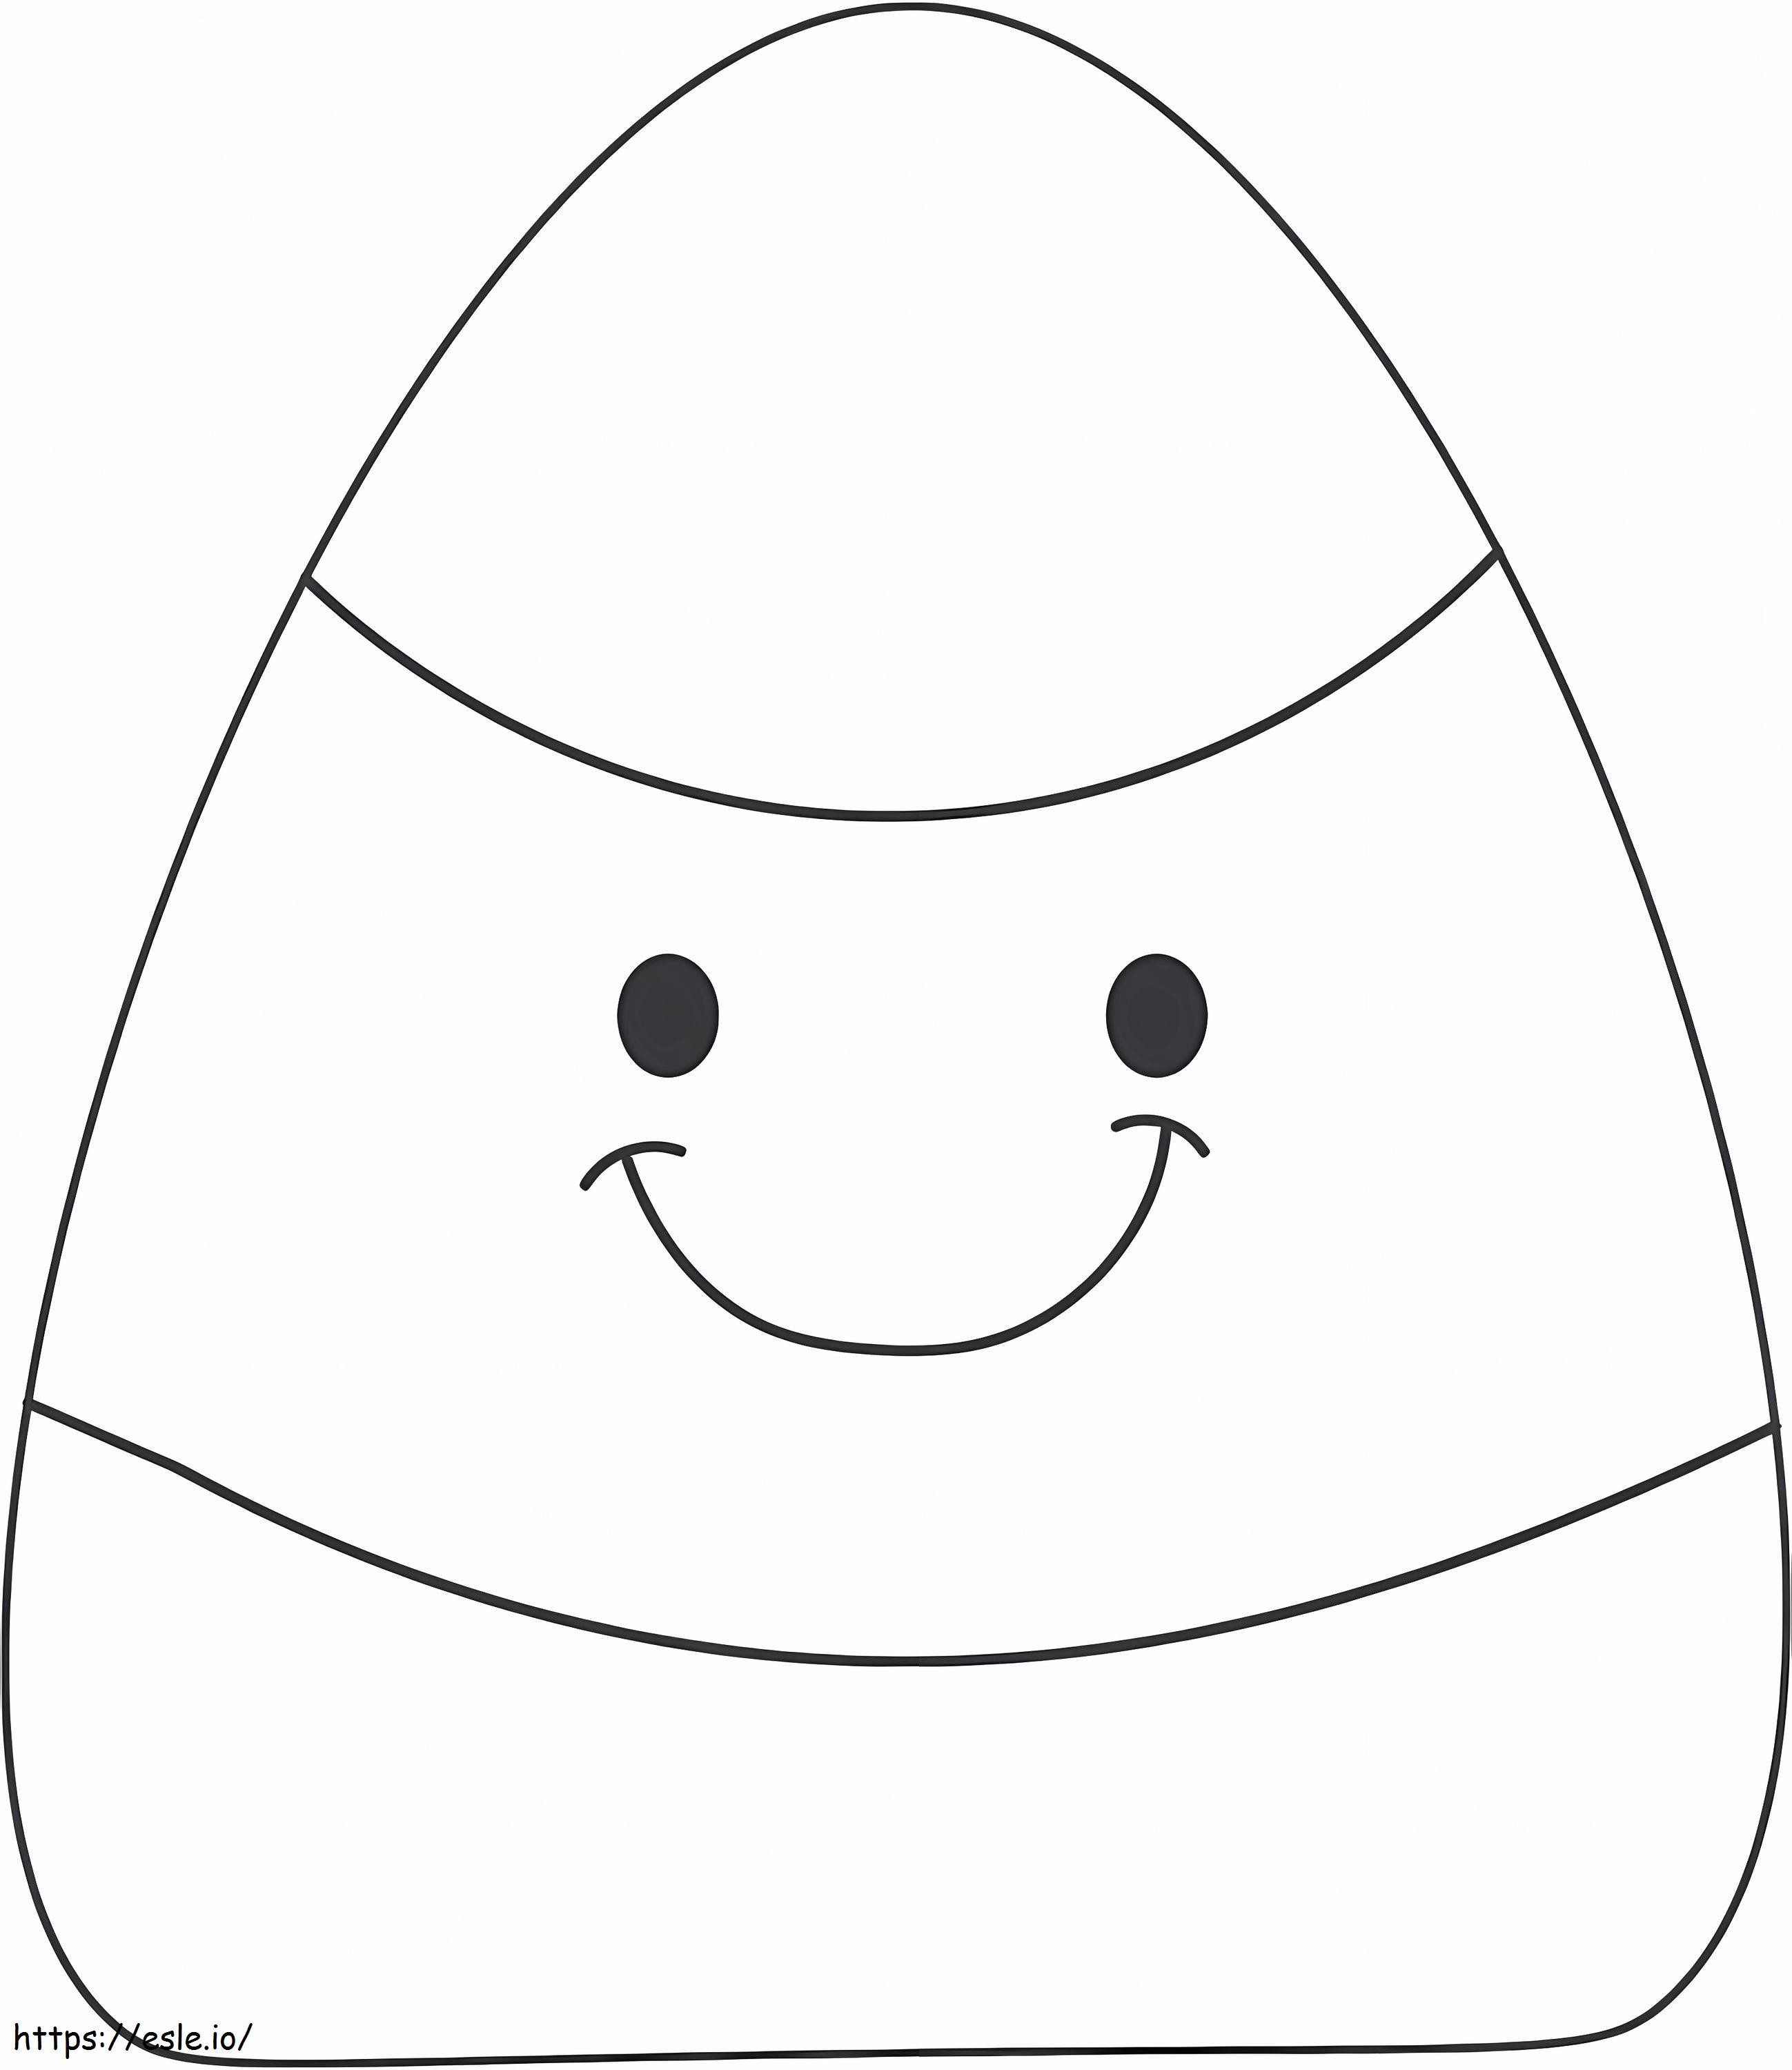 Candy Corn Smiles coloring page